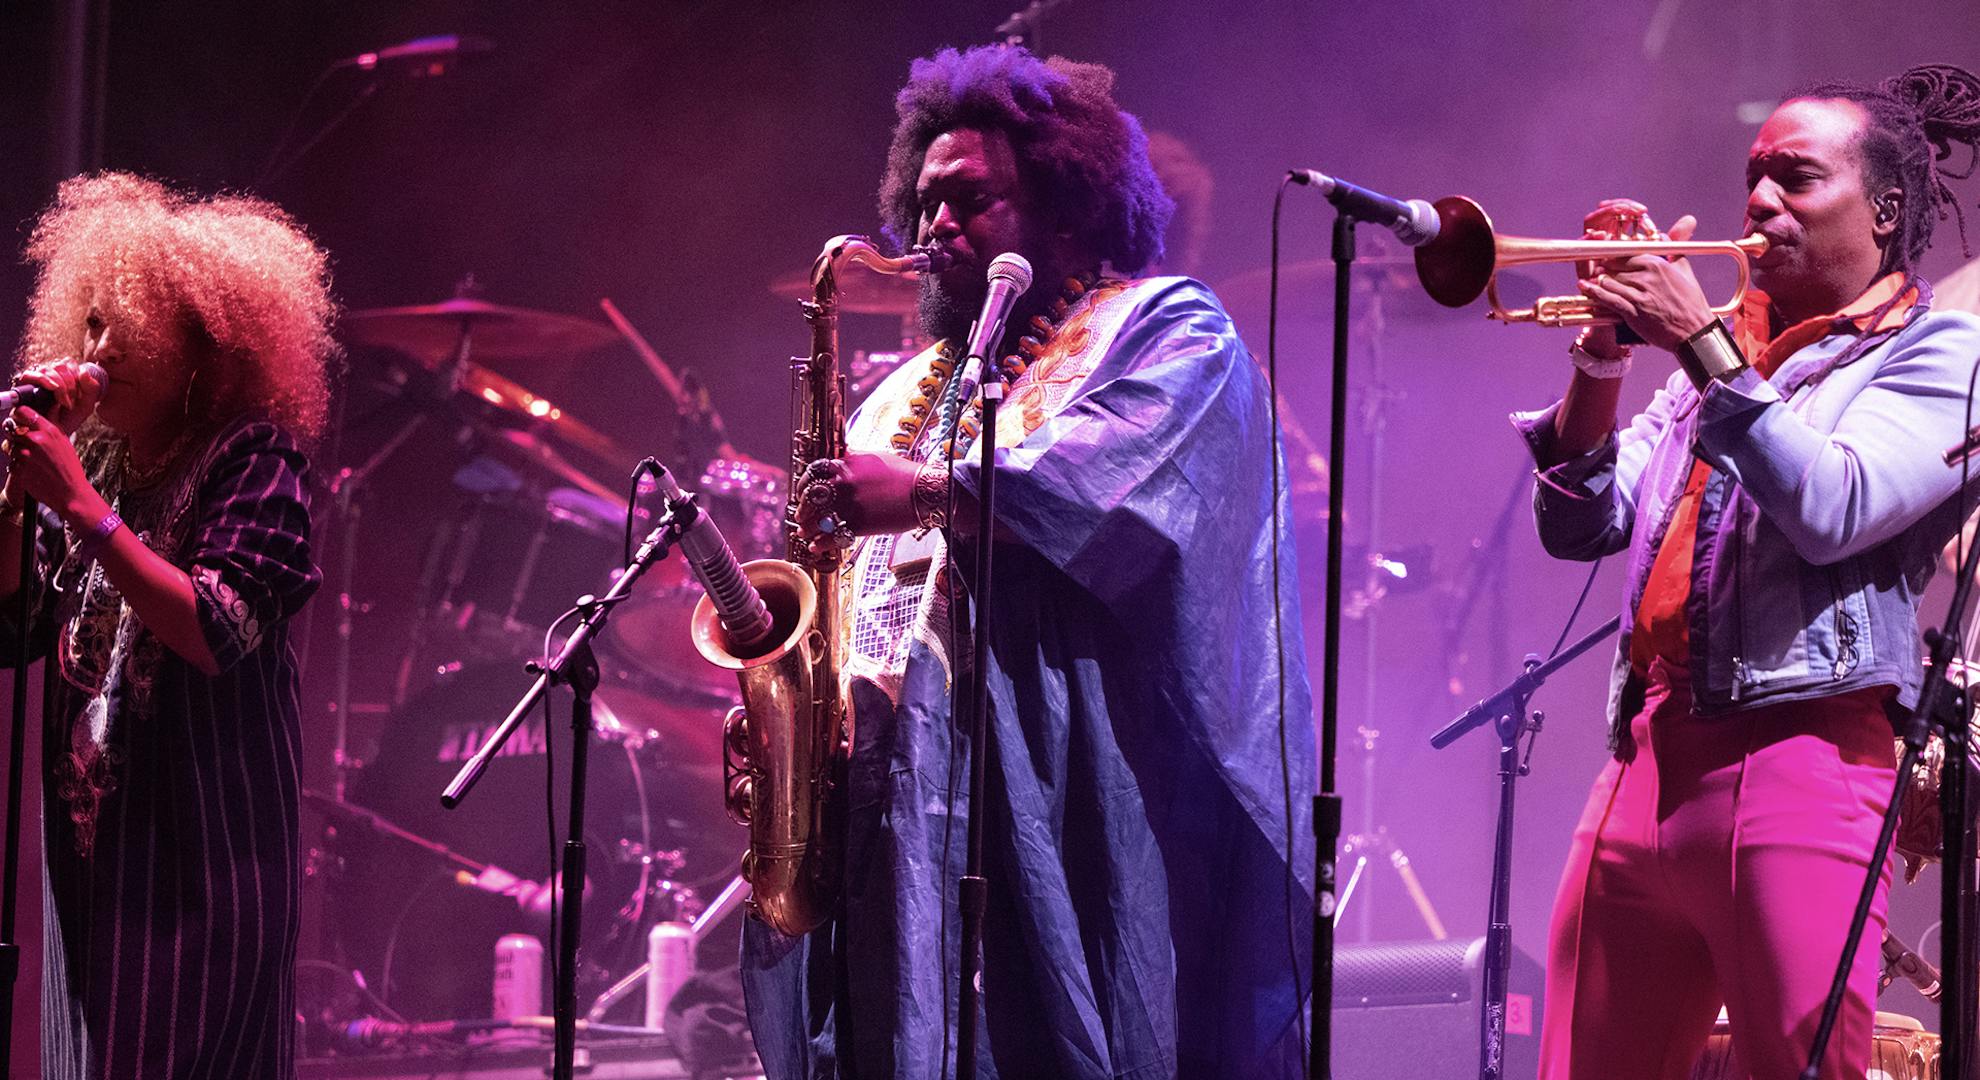 Musician Kamasi Washington (C) performs onstage during the Smokin Grooves Festival at Los Angeles State Historic Park on March 19, 2022 in Los Angeles, California. (Photo by Scott Dudelson/Getty Images)